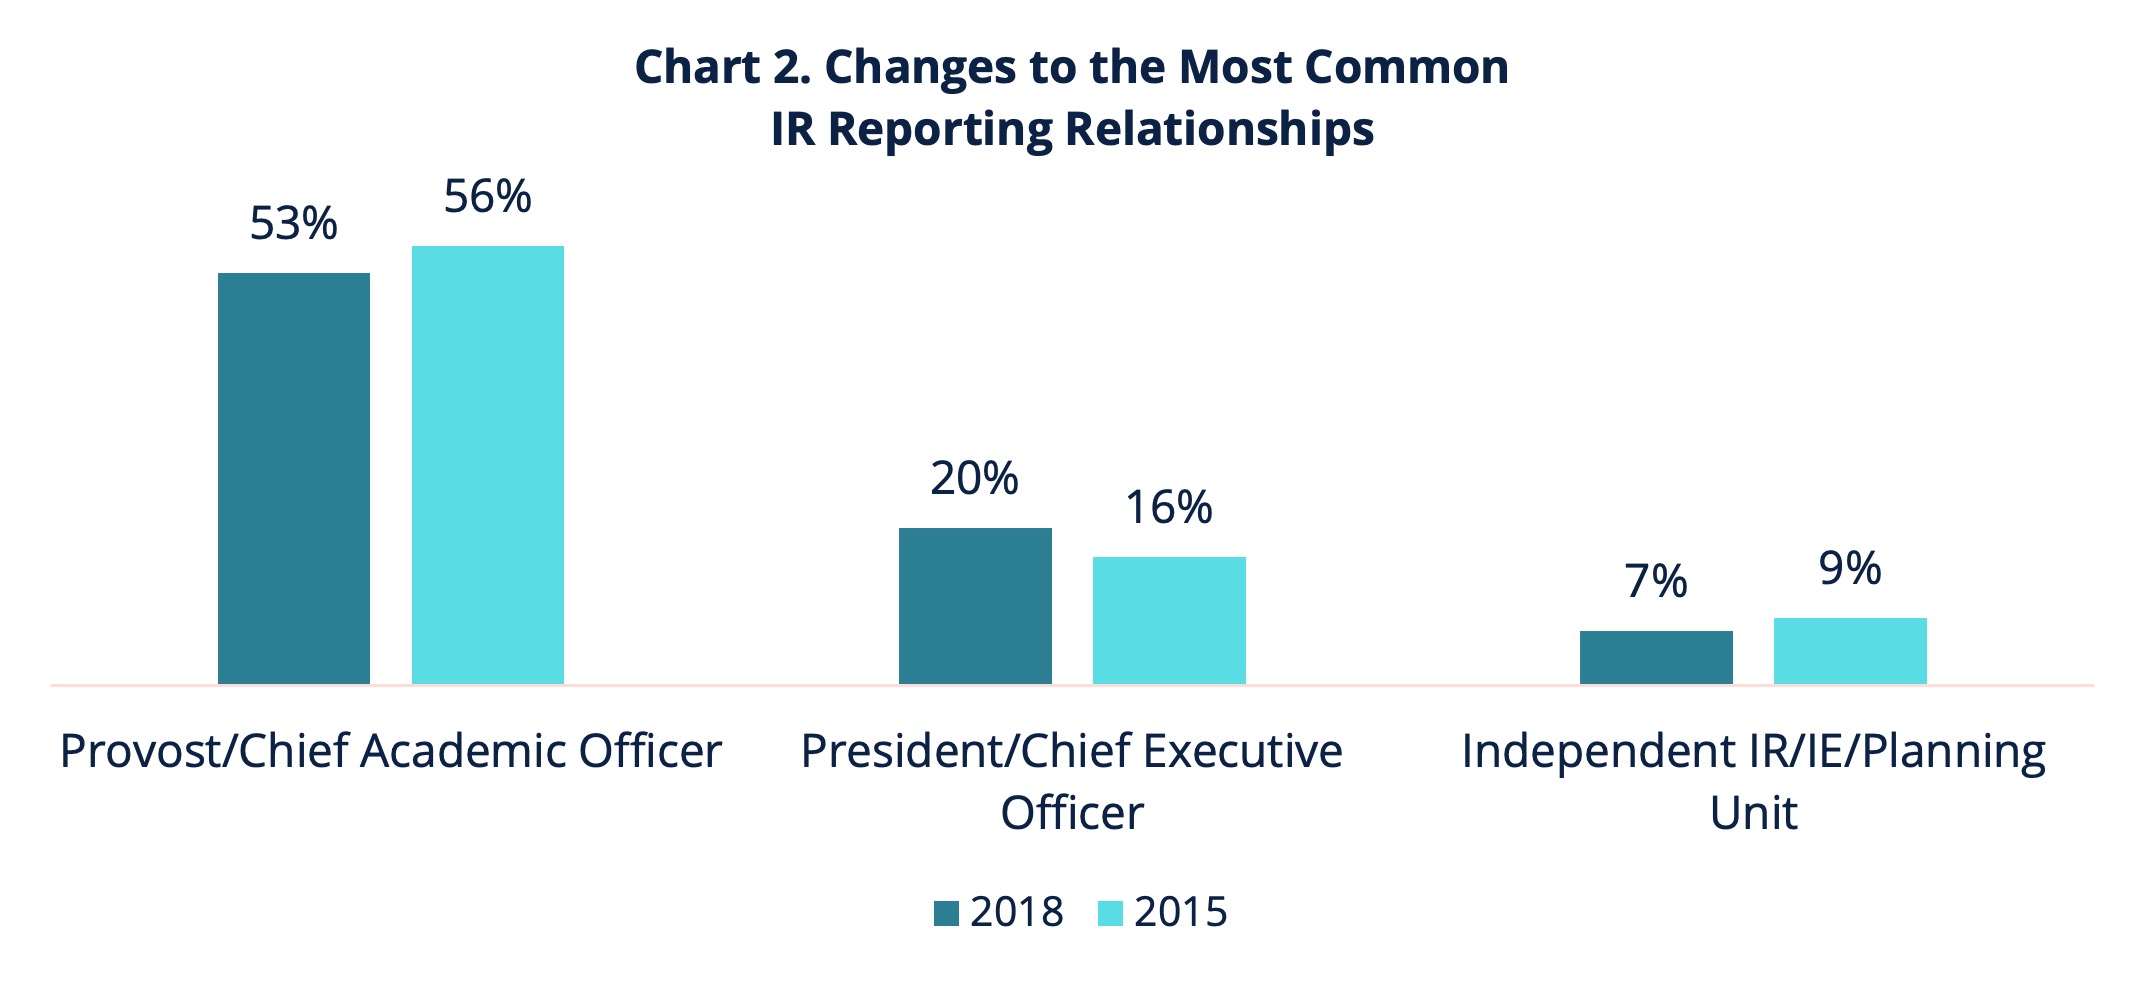 Chart 2. Changes to the Most Common IR Reporting Relationships